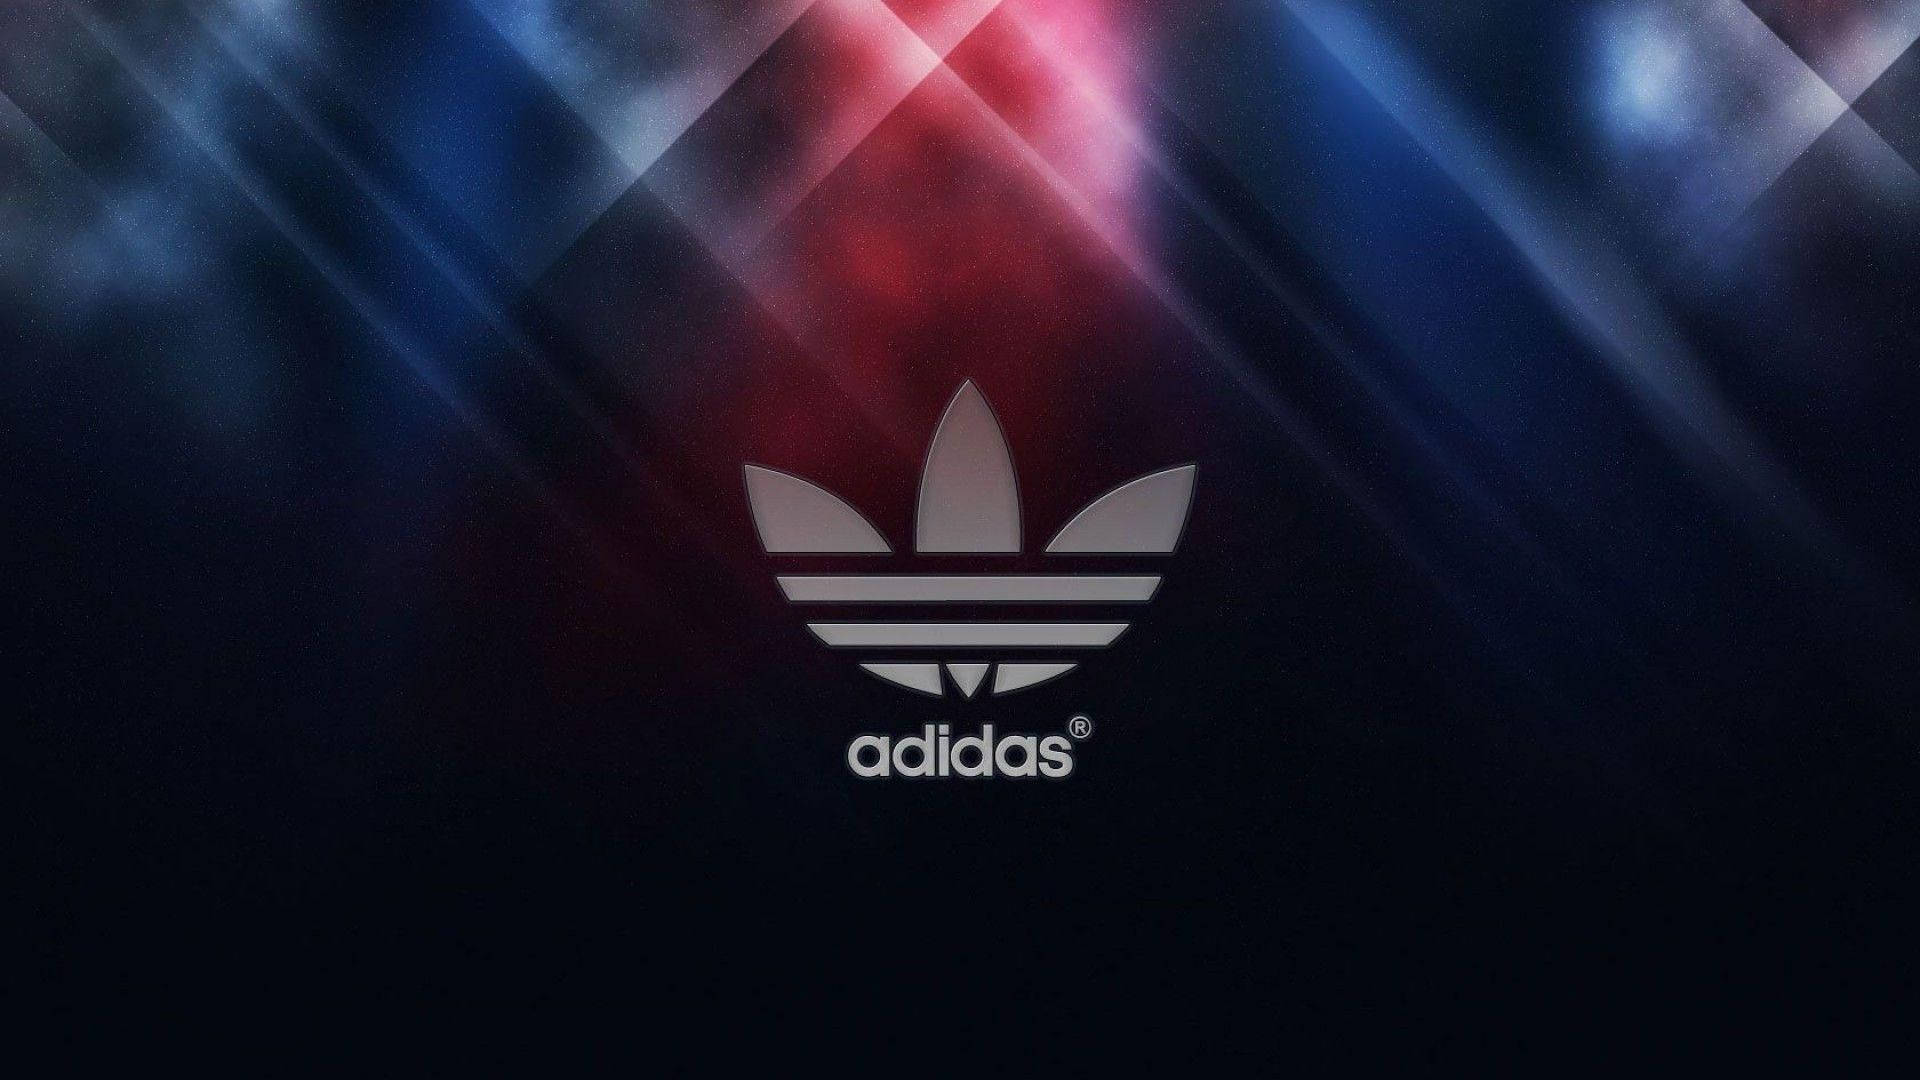 Adidas In Disco Lights